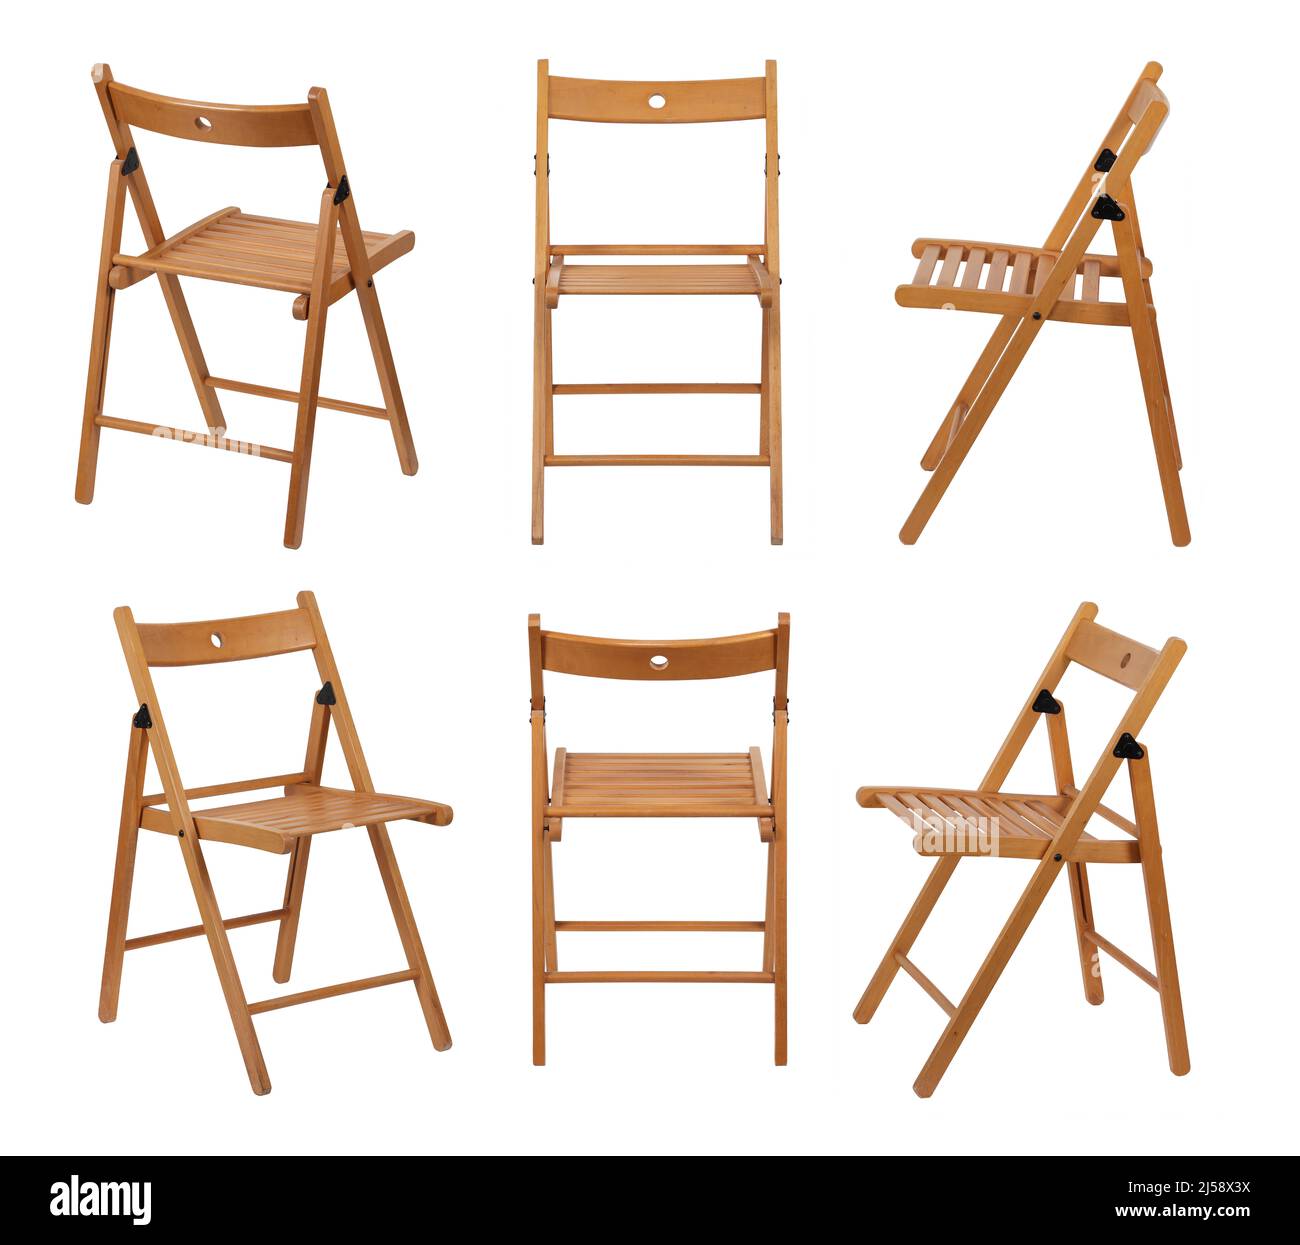 Six angles of a folding wood chair on white with clipping path Stock Photo